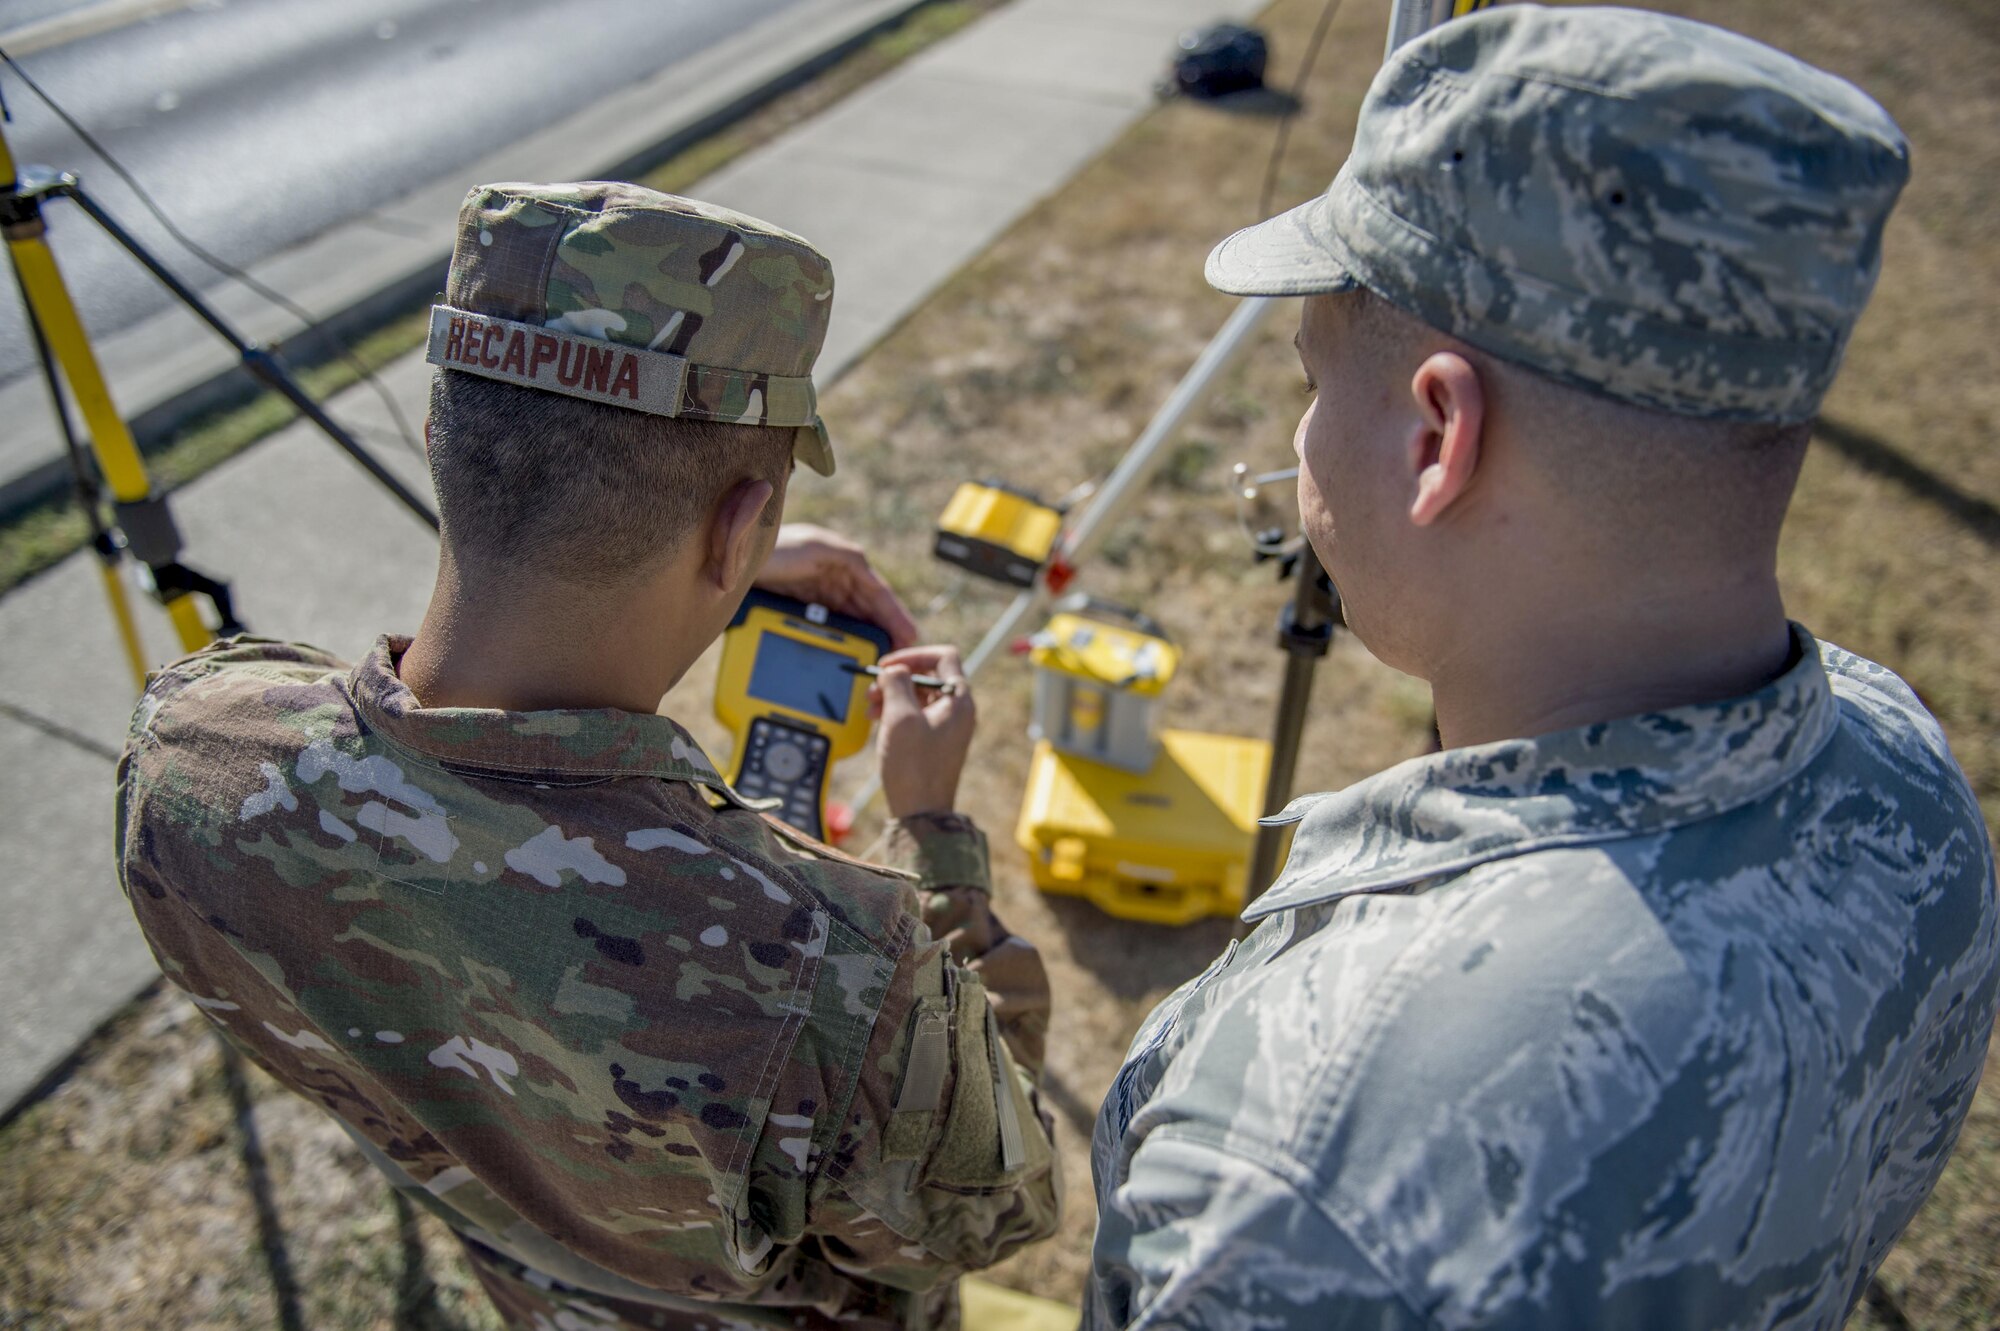 Senior Airmen Giann Recapunra and Adam Gleason, engineering specialists with the 1st Special Operations Civil Engineer Squadron, confirm the location of a facility at Hurlburt Field, Fla., Nov. 7, 2016. The Global Positioning System corrects itself for an accurate location read using real-time kinematics. (U.S. Air Force photo by Airman 1st Class Isaac O. Guest IV)